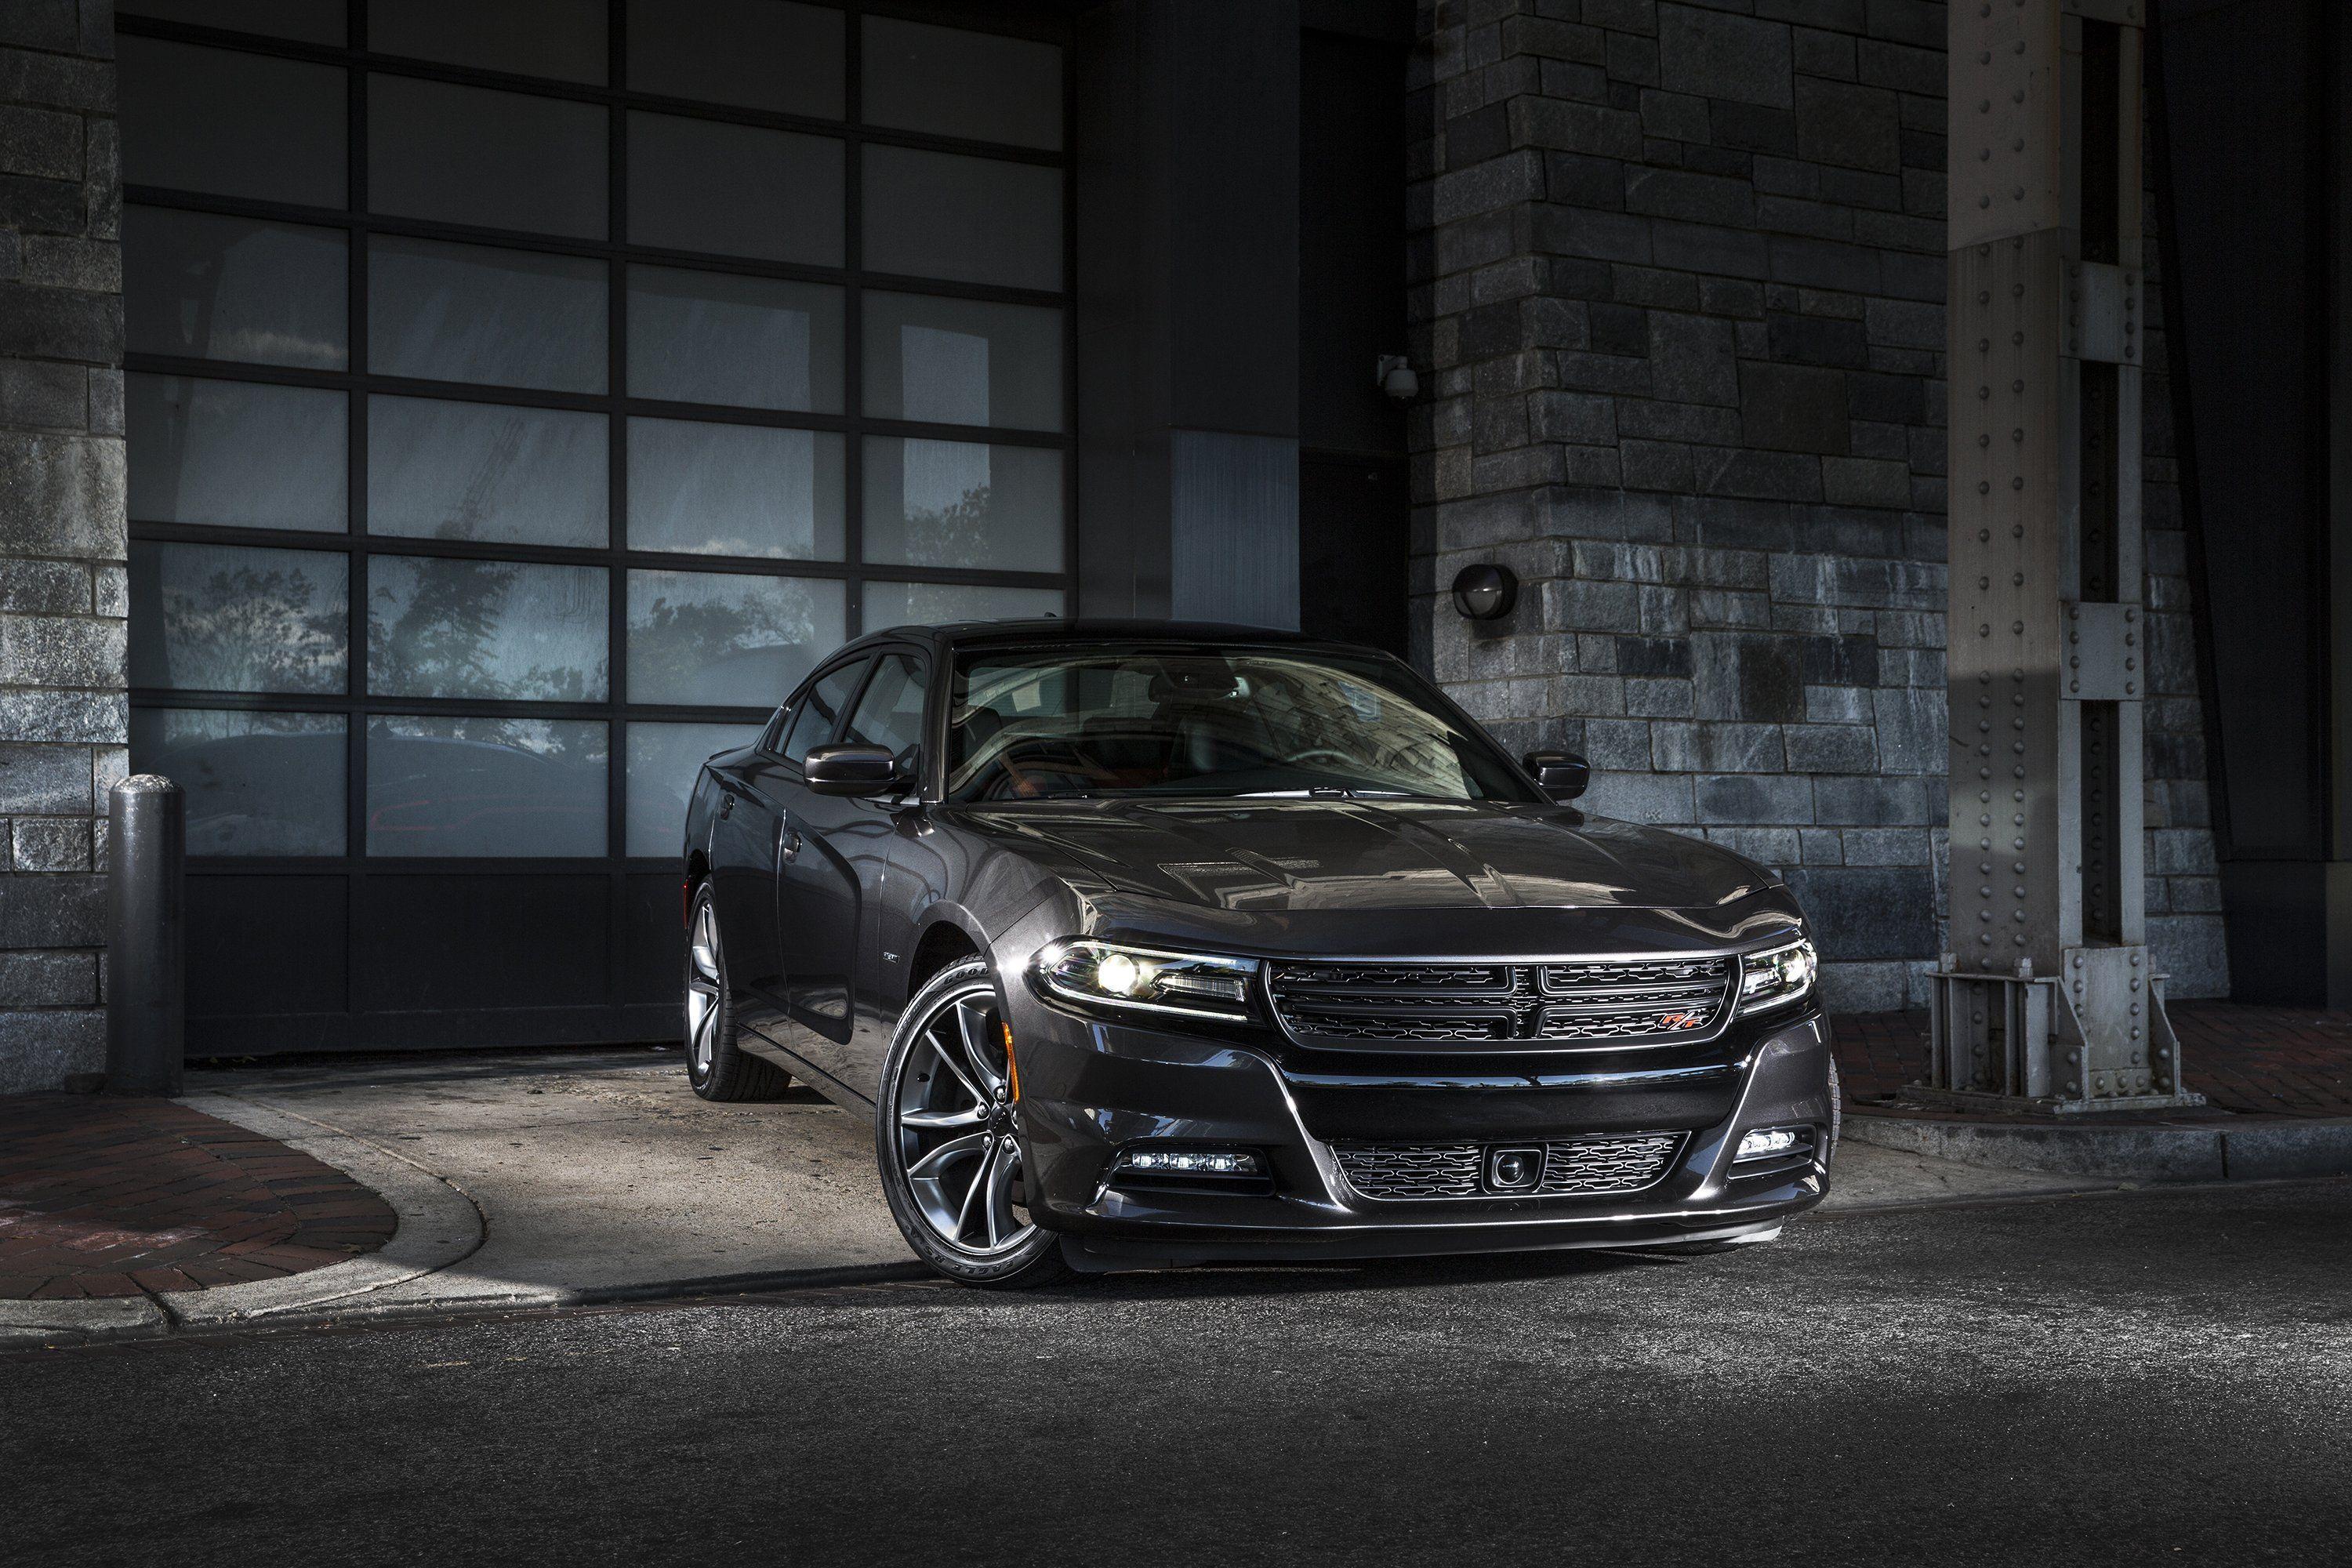 Dodge Charger Wallpaper, 47 Dodge Charger Image and Wallpaper